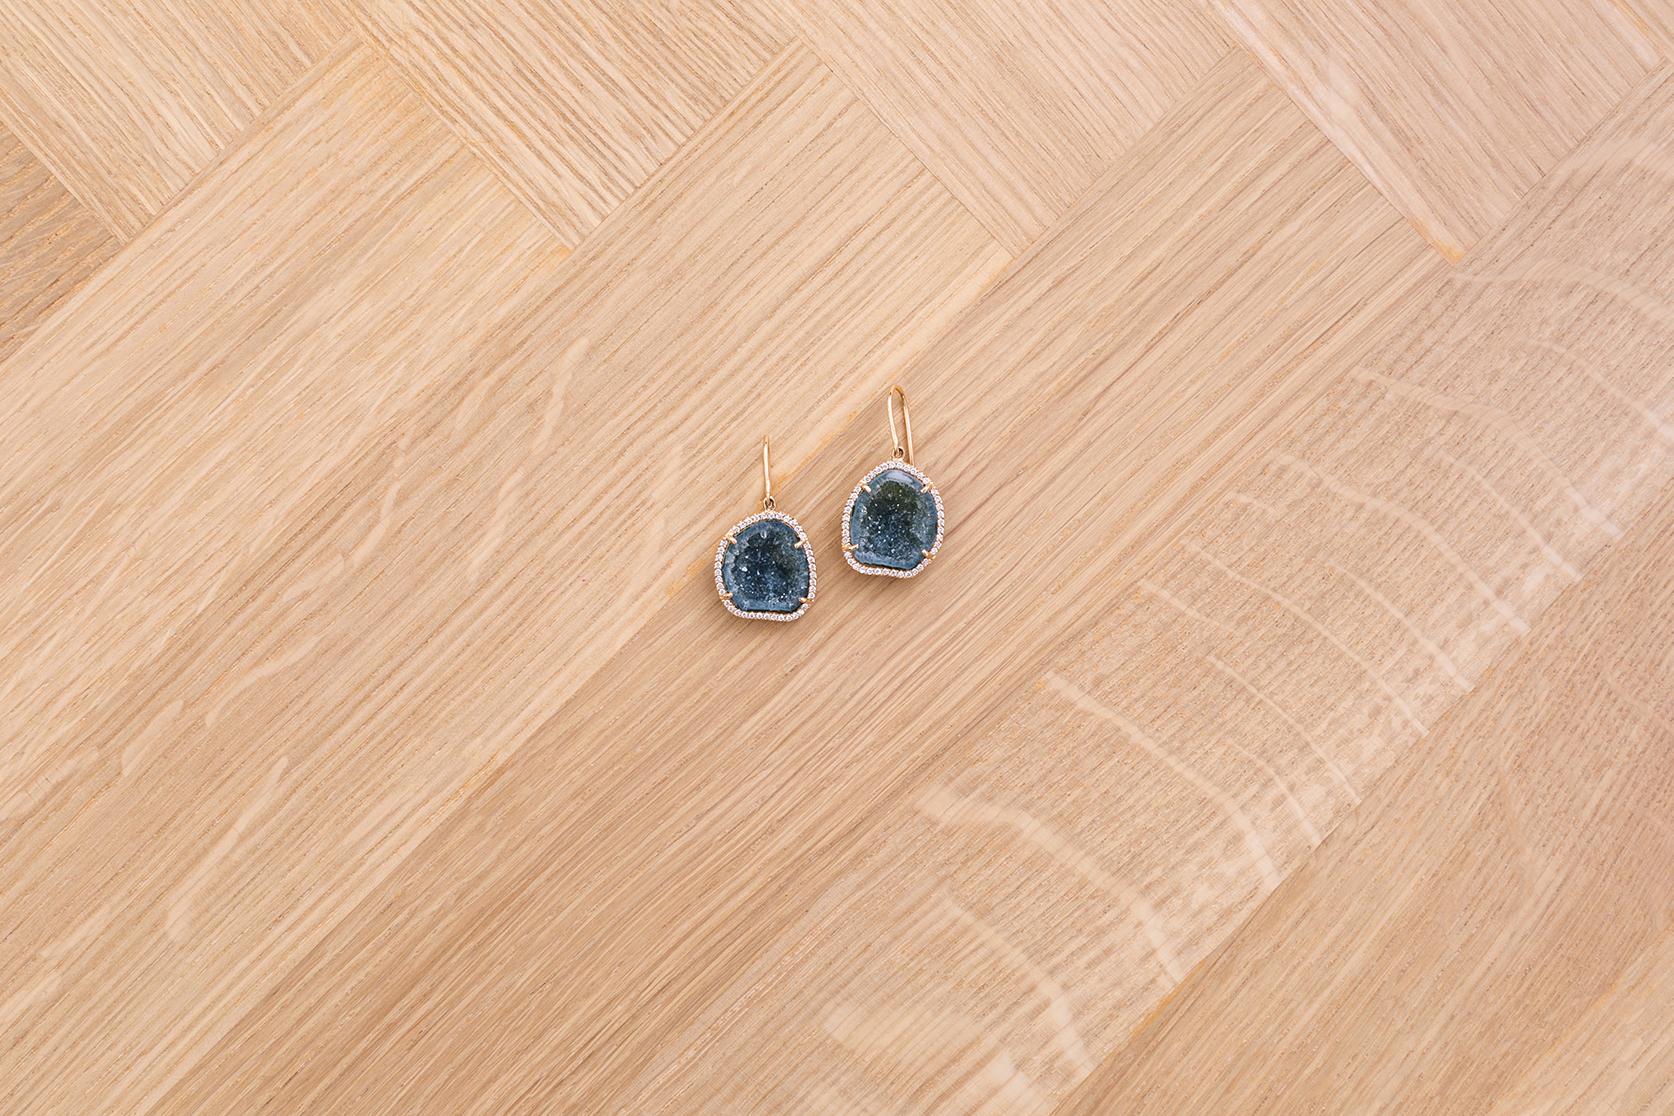 Karolin's Jewellery is totally unique. So are these hand-picked agate geodes in blue/green. The 18K rose gold settings are framed by 0.39 ct of diamonds that follow the organic contour. Wear them in Summer or add them to your Winter Whites.